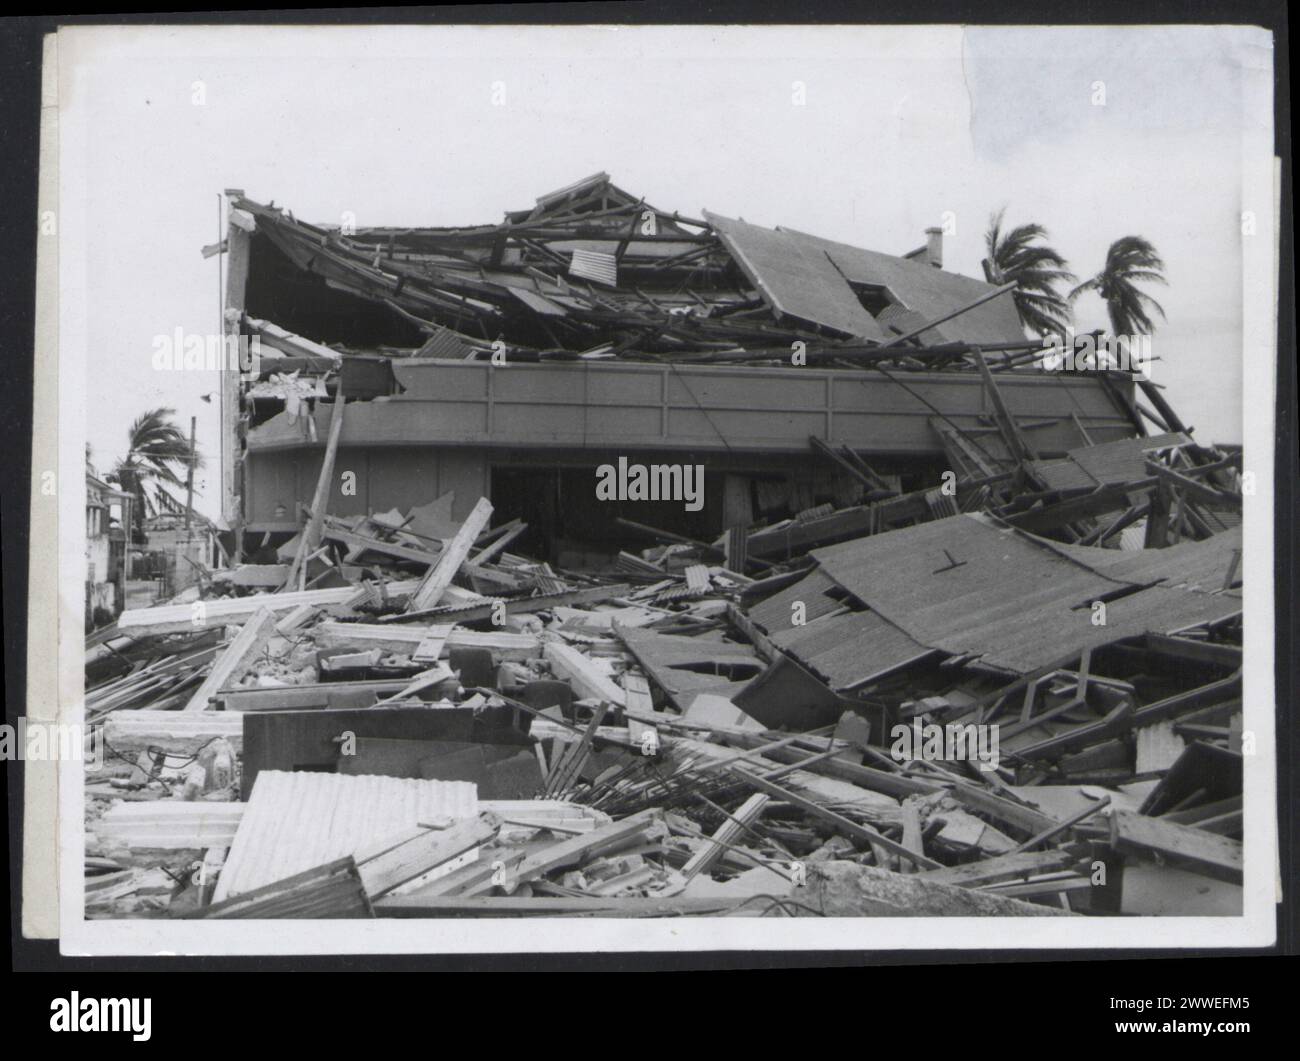 Description: Bardados. [Devastation caused by Hurricane Janet to a theatre in Worthing, Barbados]. Photograph No K 19874 Official Barbados photograph compiled by Central Office of Information. Publicity statement on reverse. Location: Barbados Date: 1955 Sept 22 barbados, caribbean, caribbeanthroughalens Stock Photo